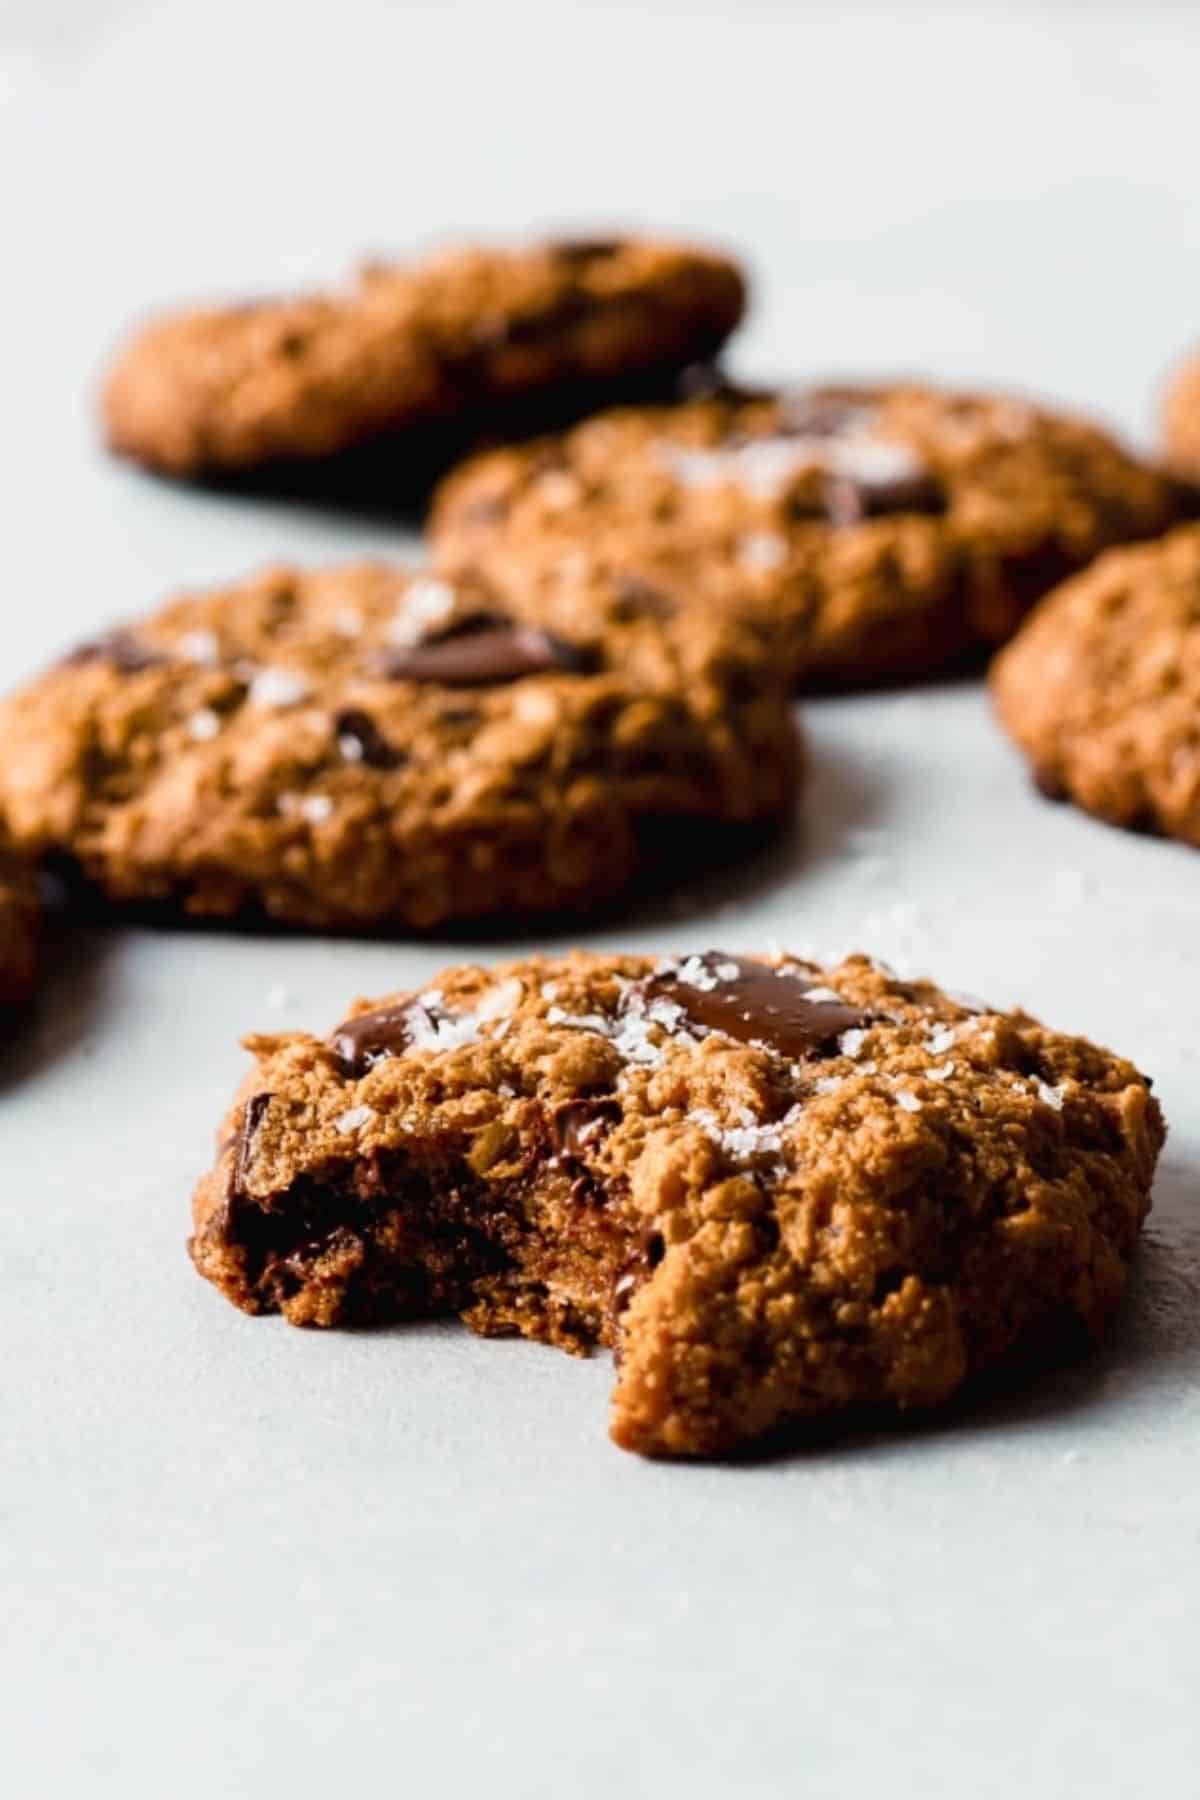 Crunchy salted oatmeal chocolate cookies.